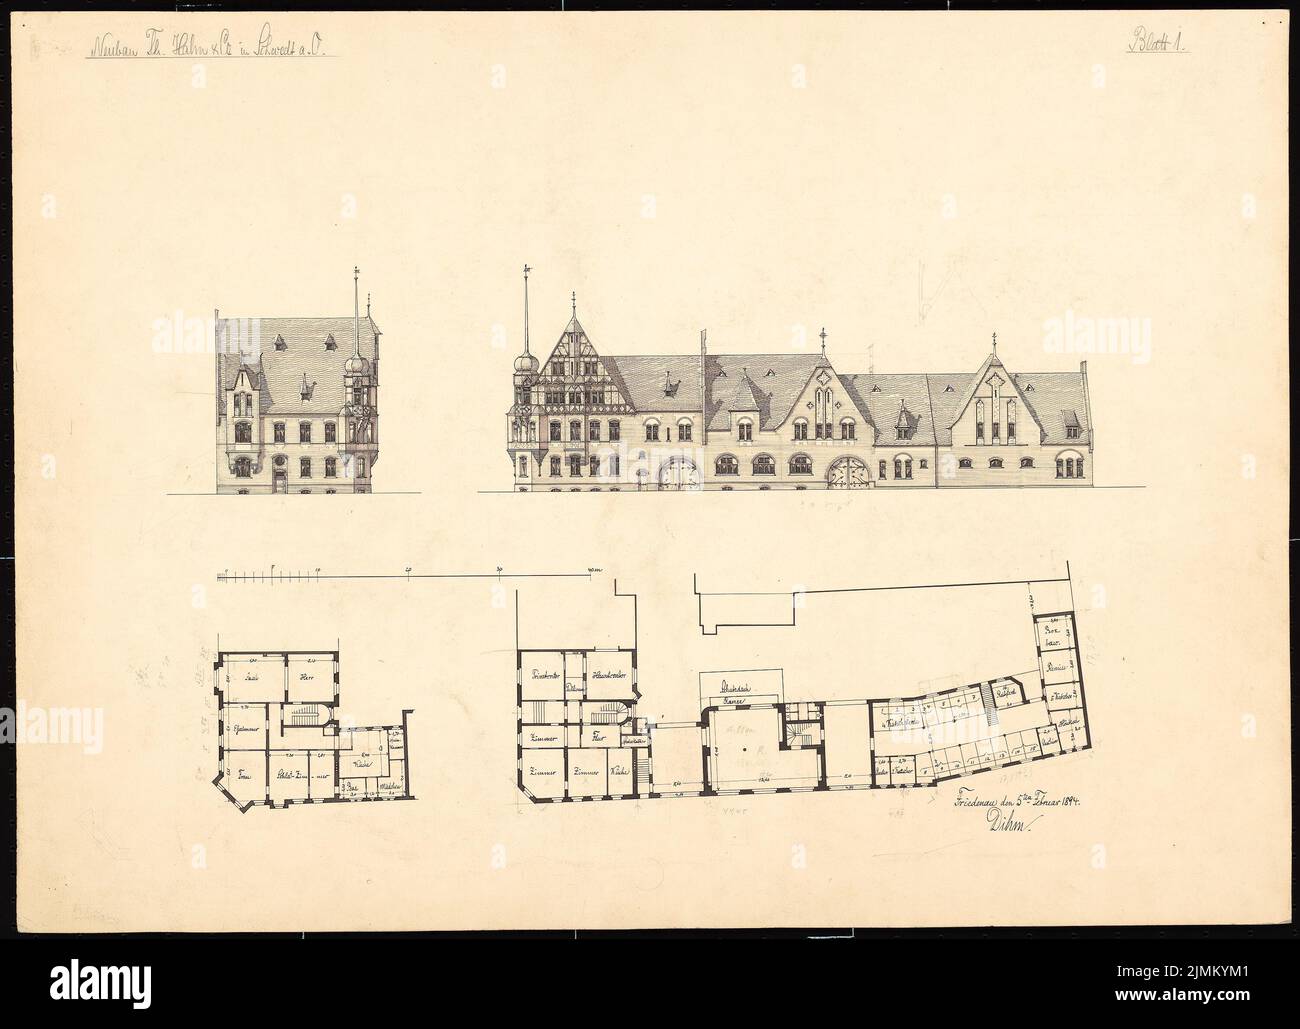 DIHM Ludwig (1849-1928), Fa. Th. Hahn and Co., Schwedt/Oder (05.02.1894): 2 views, 2 floor plans. Ink on cardboard, 51.1 x 70.8 cm (including scan edges) Stock Photo